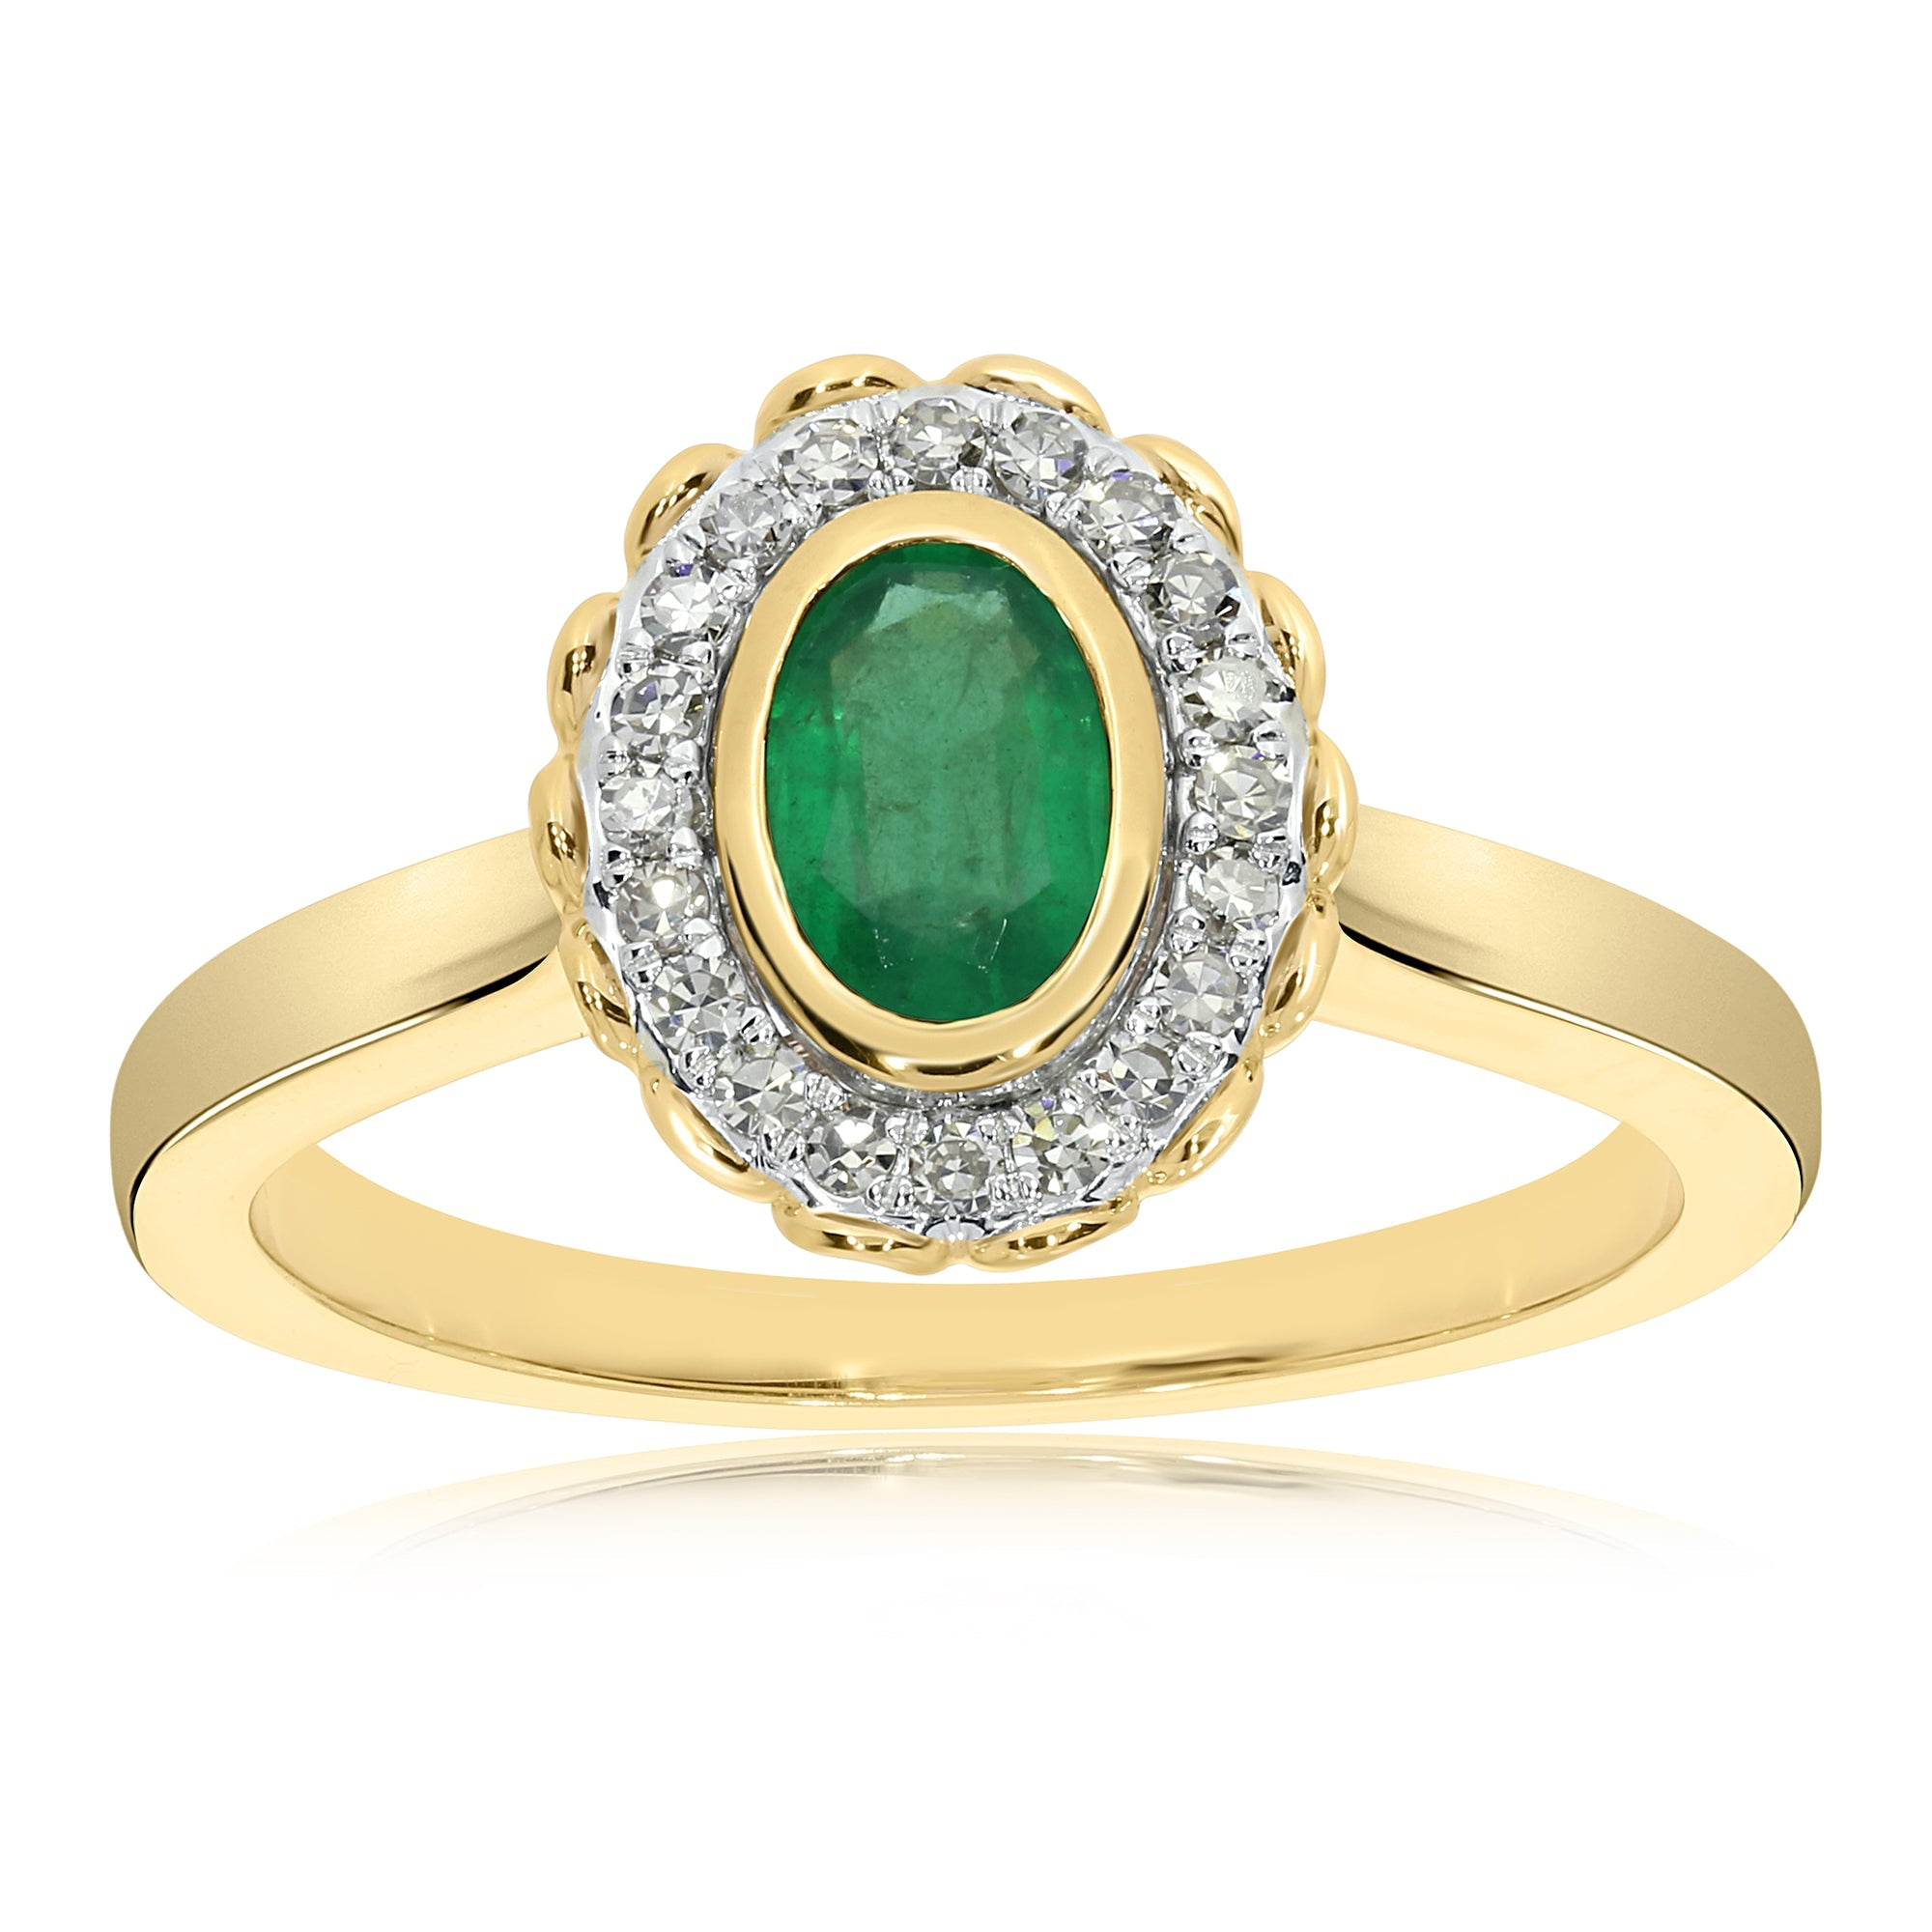 9ct gold 6x4mm oval emerald & diamond cluster ring 0.13ct